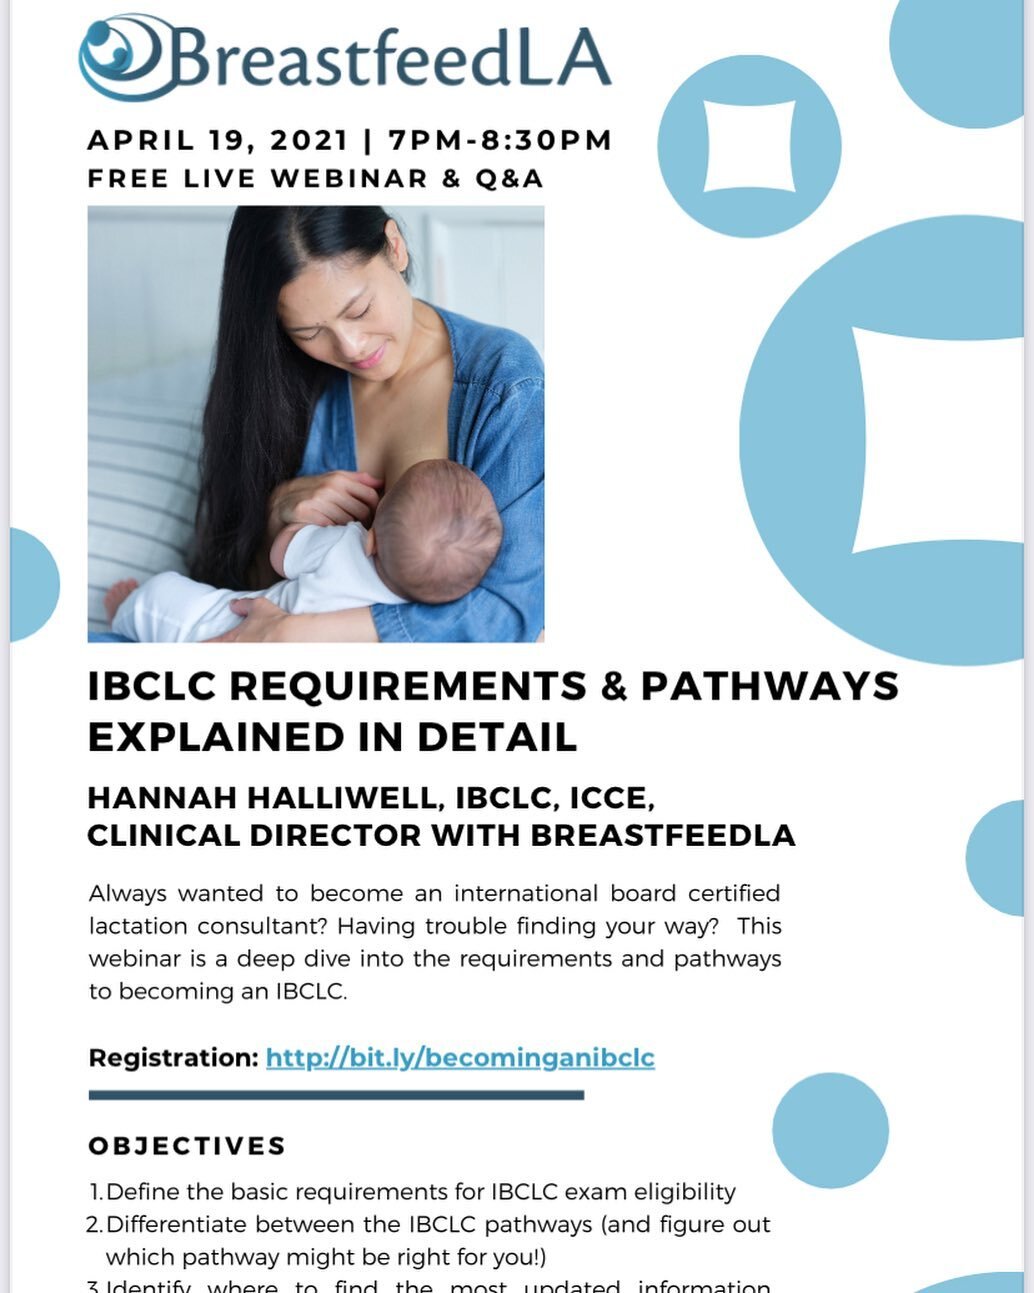 Interested in becoming an IBCLC or want to learn more about the profession? Breastfeed LA is offering a free virtual Q&amp;A! 

http://events.r20.constantcontact.com/register/event?llr=qfjggocab&amp;oeidk=a07ehqfnghwdb08f735&amp;condition=SO_OVERRIDE